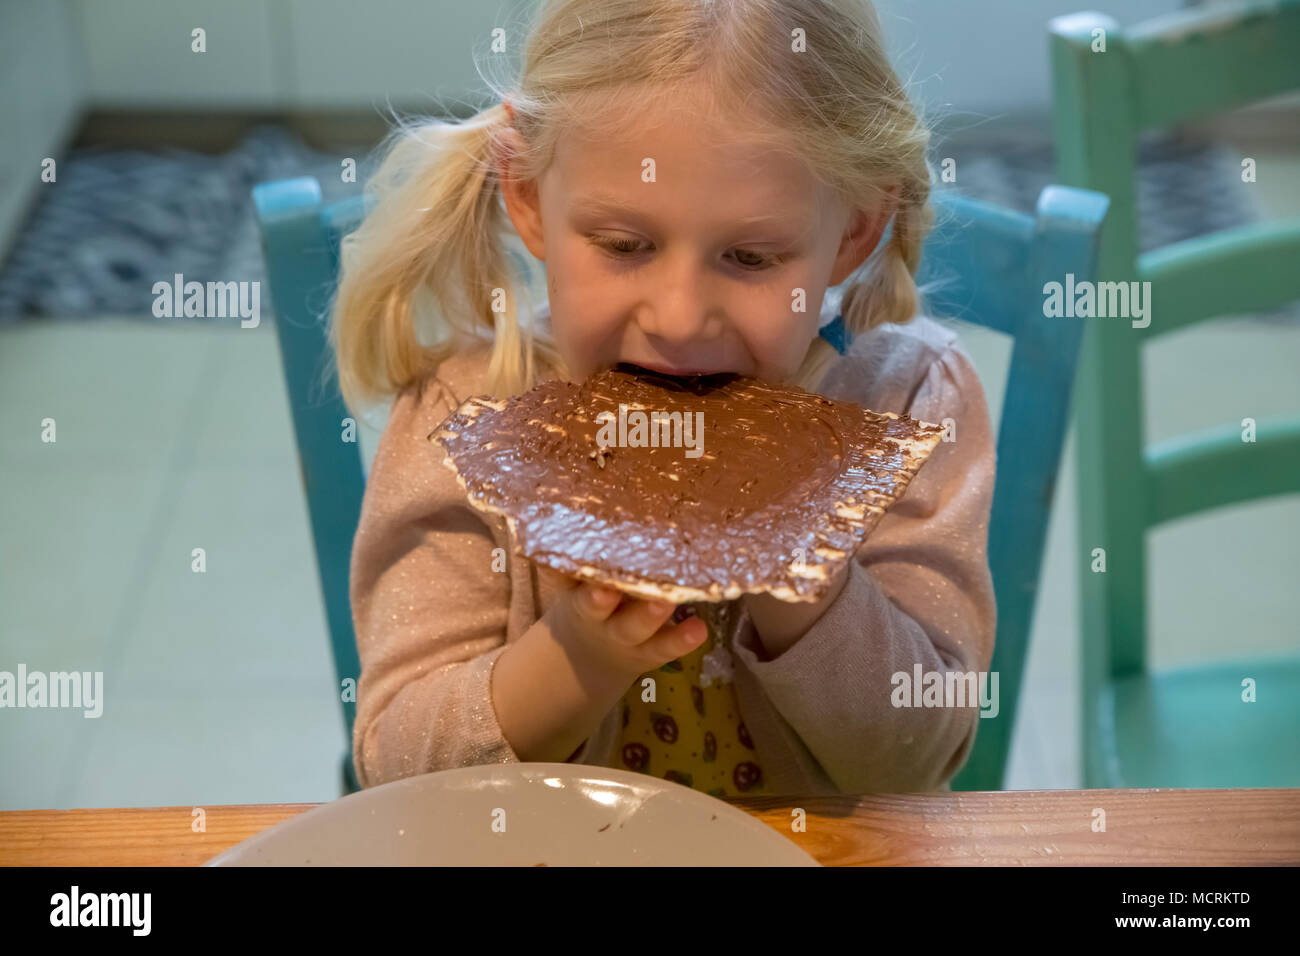 Portrait of a young girl of five eats Matzo with chocolate spread during Passover Model release available Stock Photo